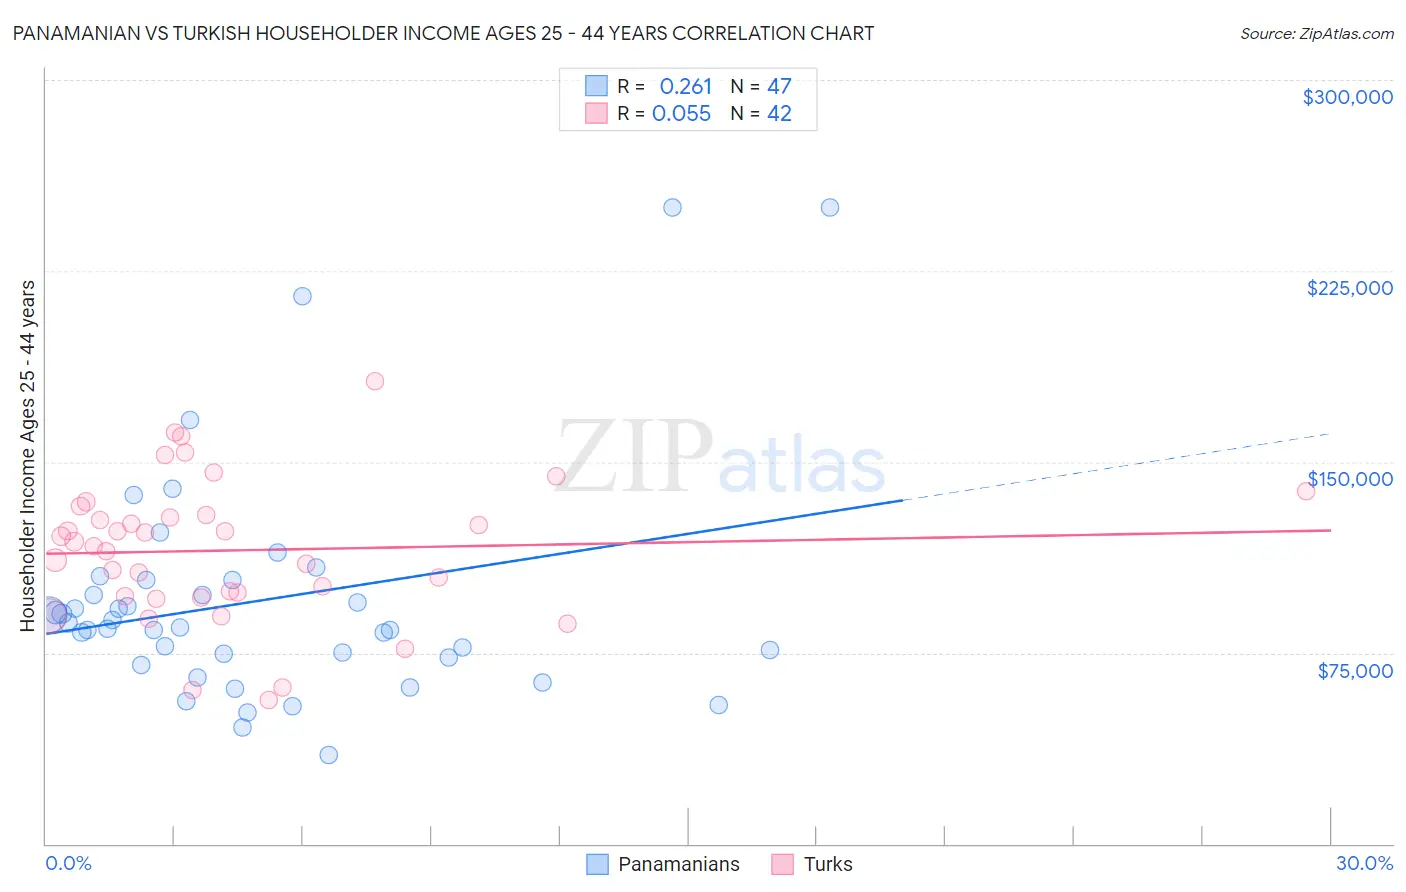 Panamanian vs Turkish Householder Income Ages 25 - 44 years